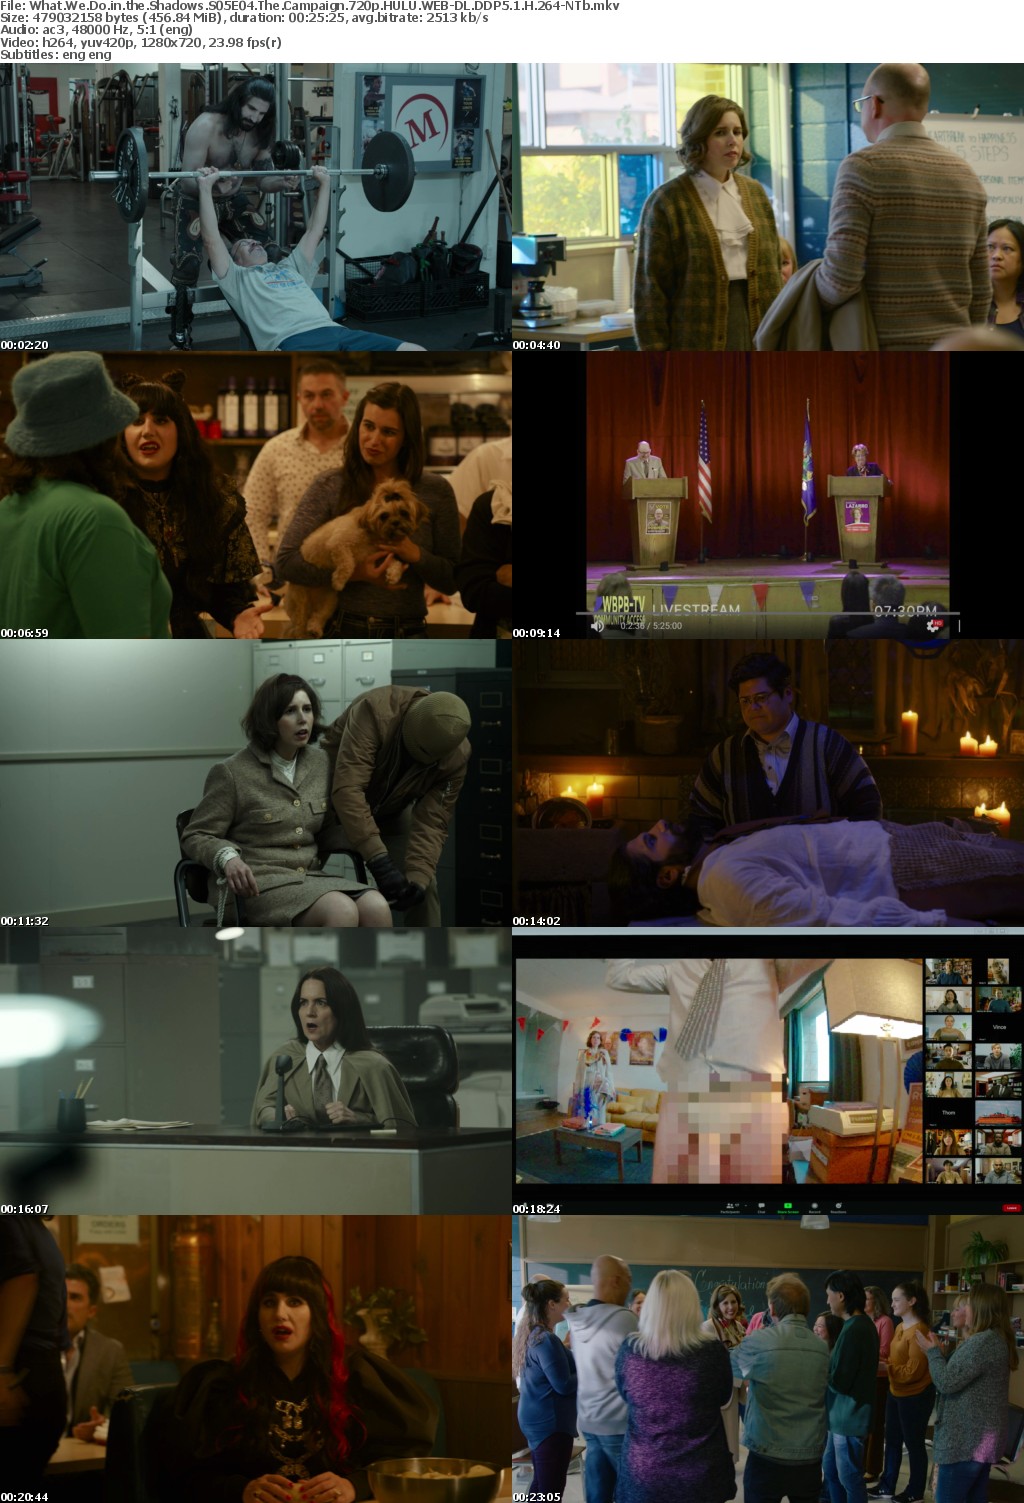 What We Do in the Shadows S05E04 The Campaign 720p HULU WEB-DL DDP5 1 H 264-NTb